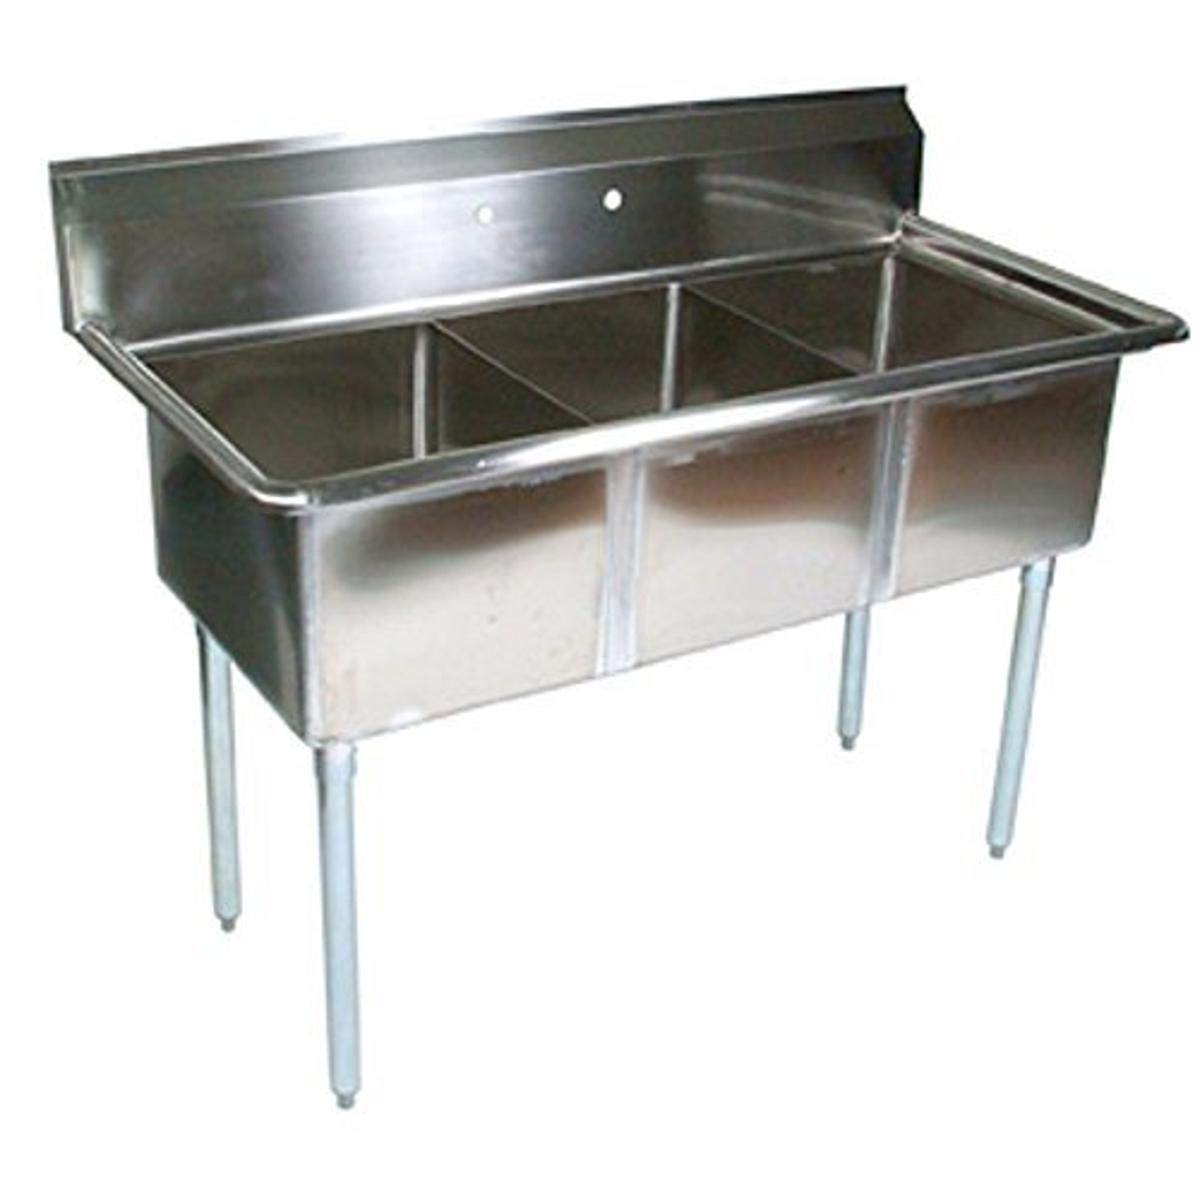 John Boos E3S8-18-12 E Series Stainless Steel Sink, 12" Deep Bowl, 3 Compartment, 59" Length x 23-1/2" Width. NSF Certified